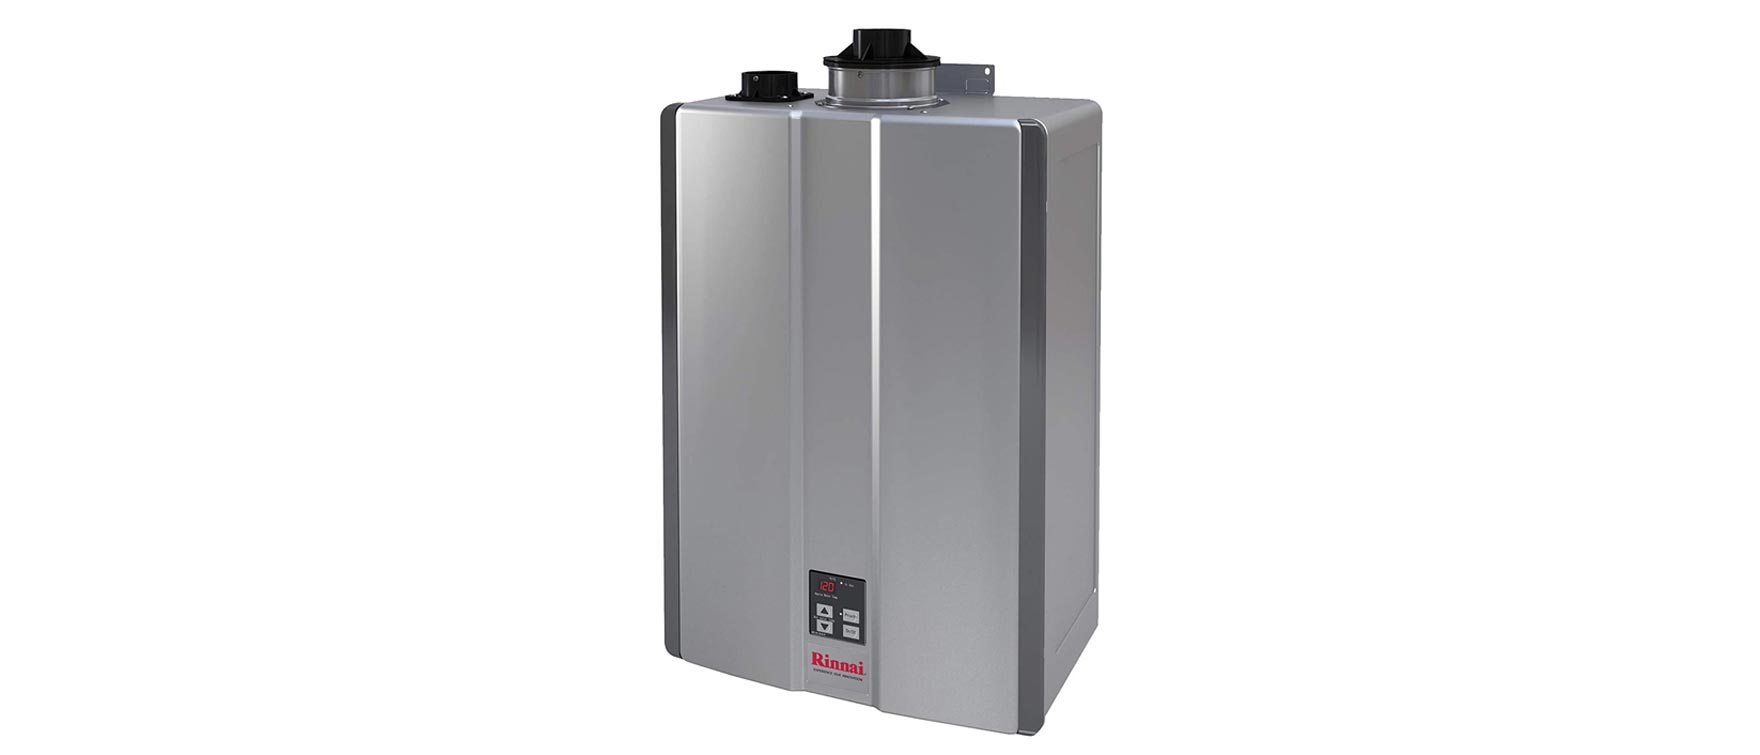 1. Best Overall: Rinnai RU199iN Tankless Water Heater